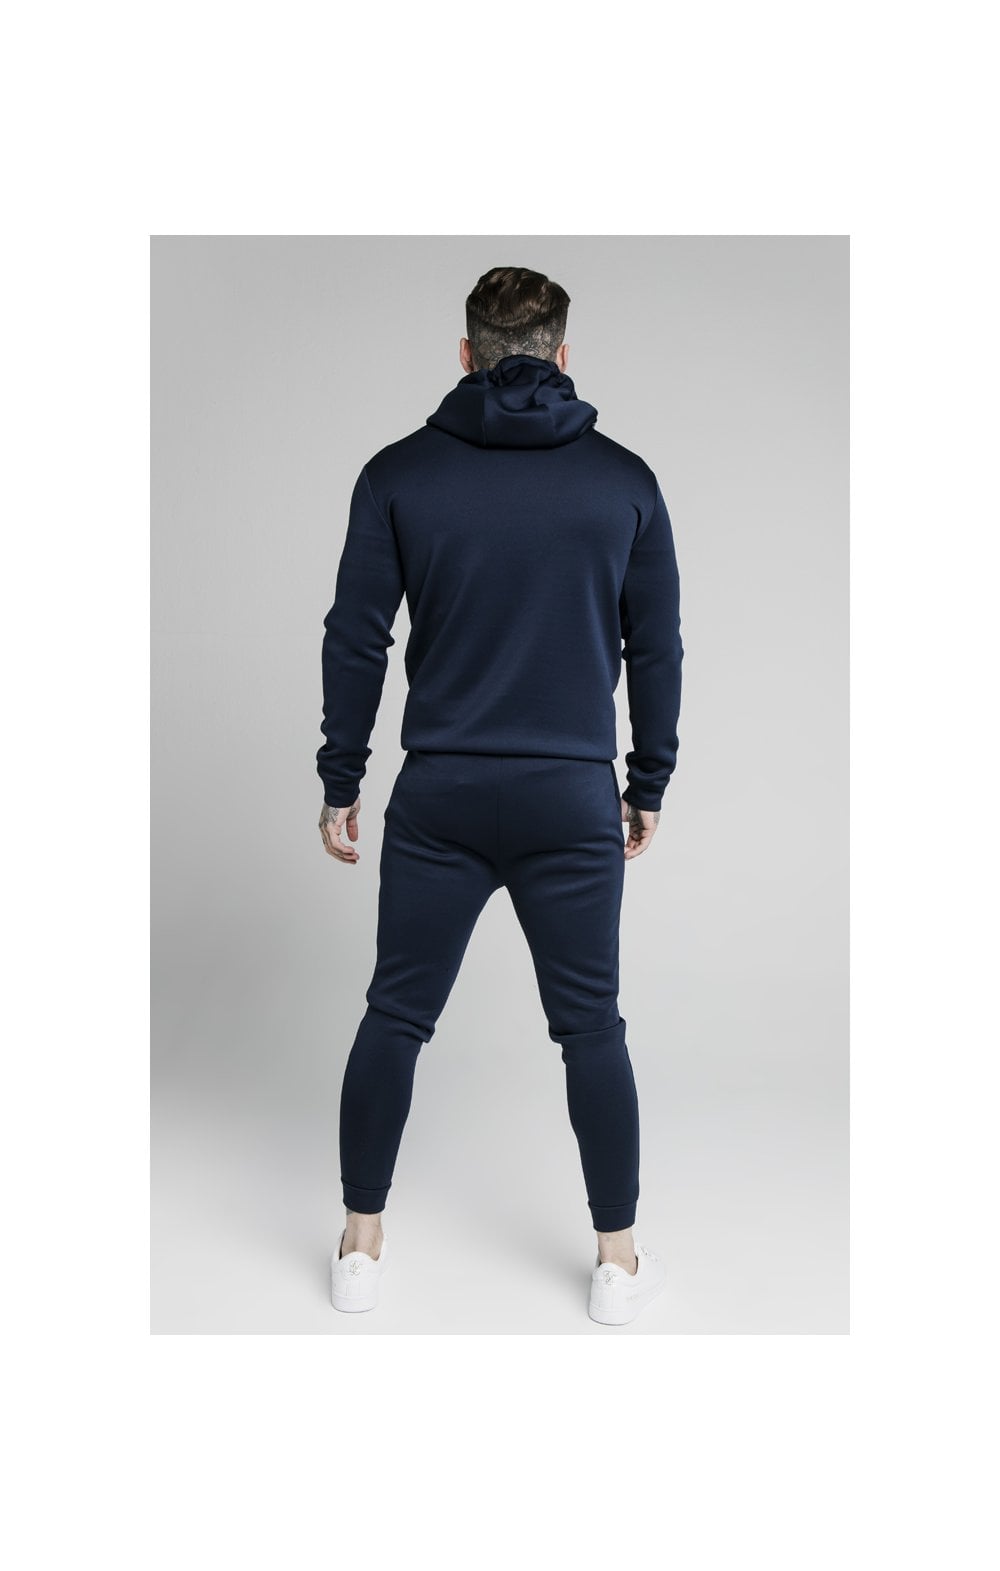 SikSilk Element Muscle Fit Overhead Hoodie - Navy & White (4)